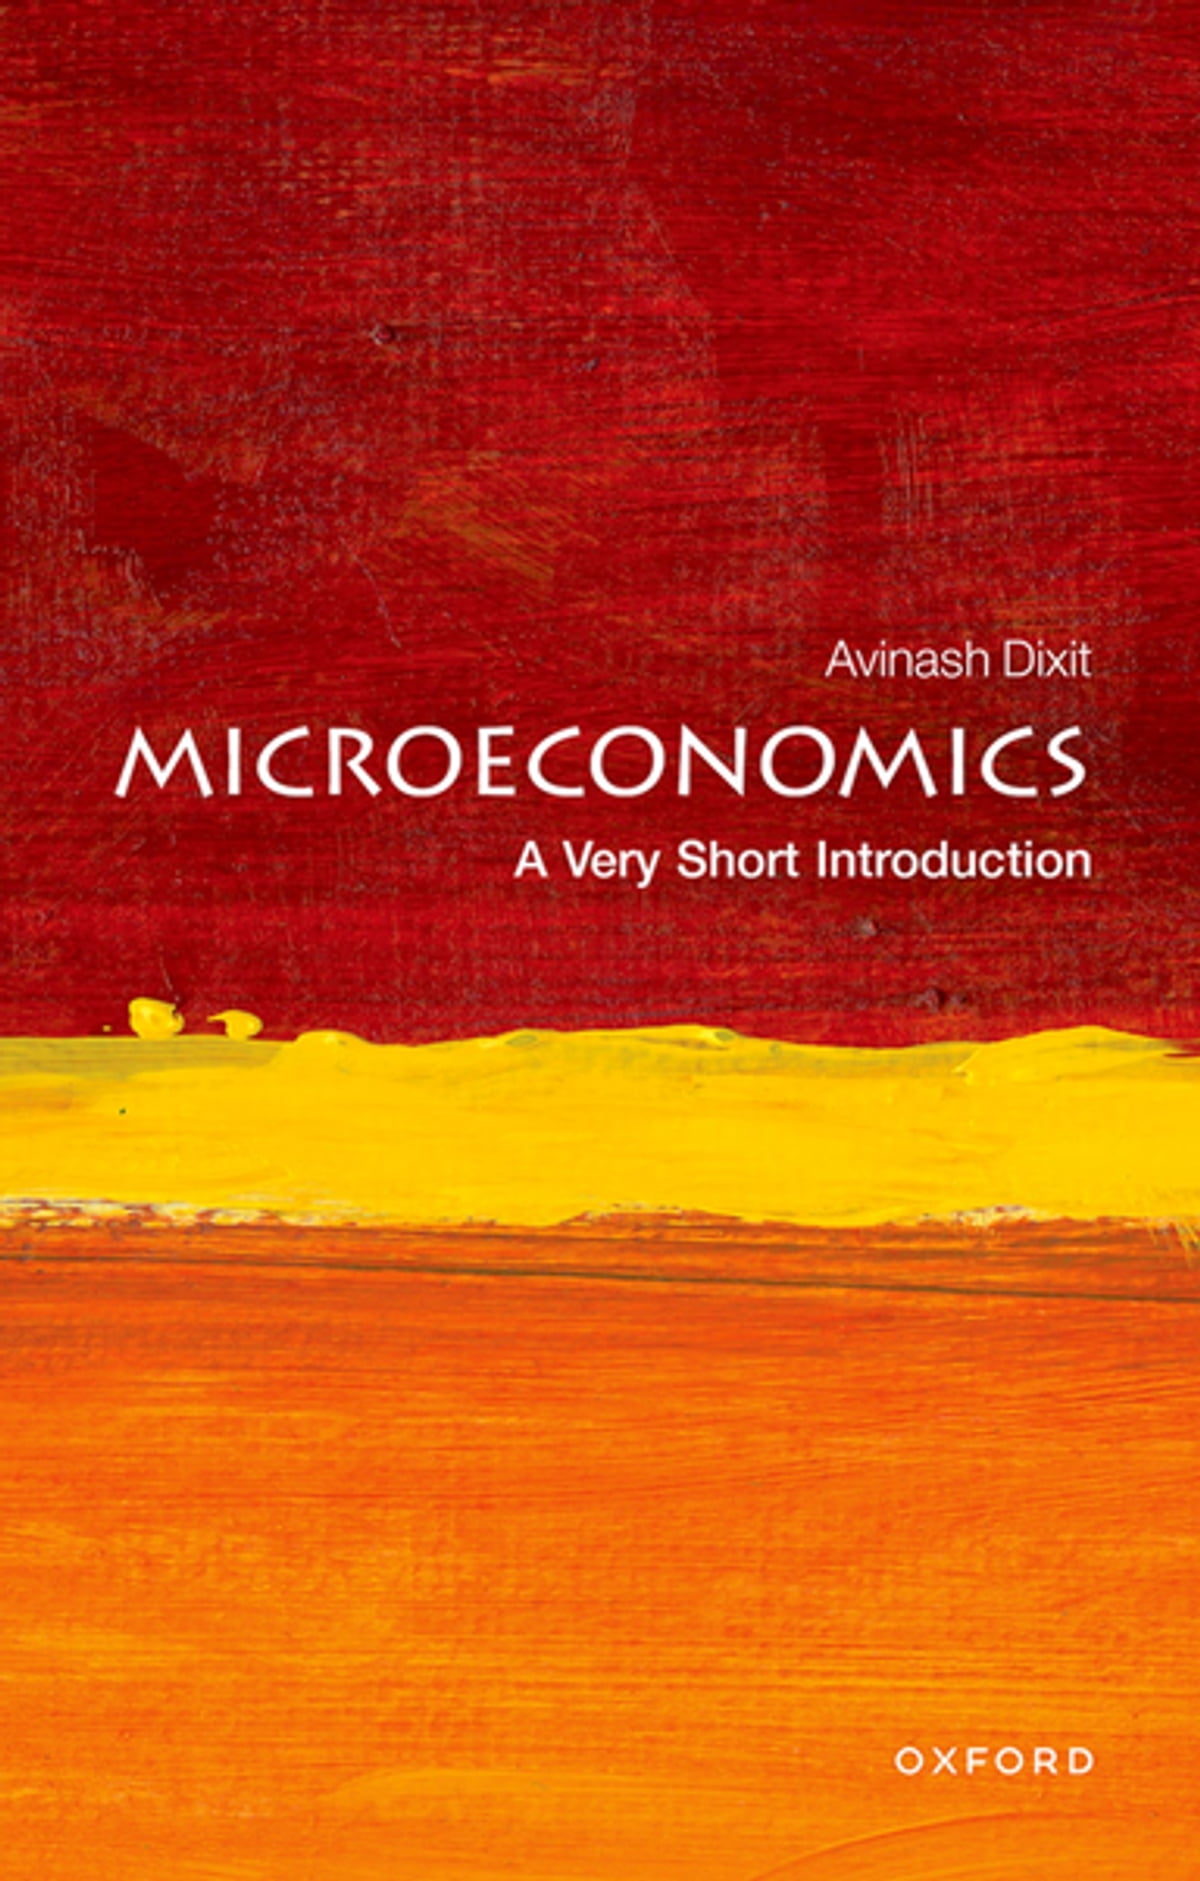 Microeconomics A Very Short Introduction by Avinash Dixit